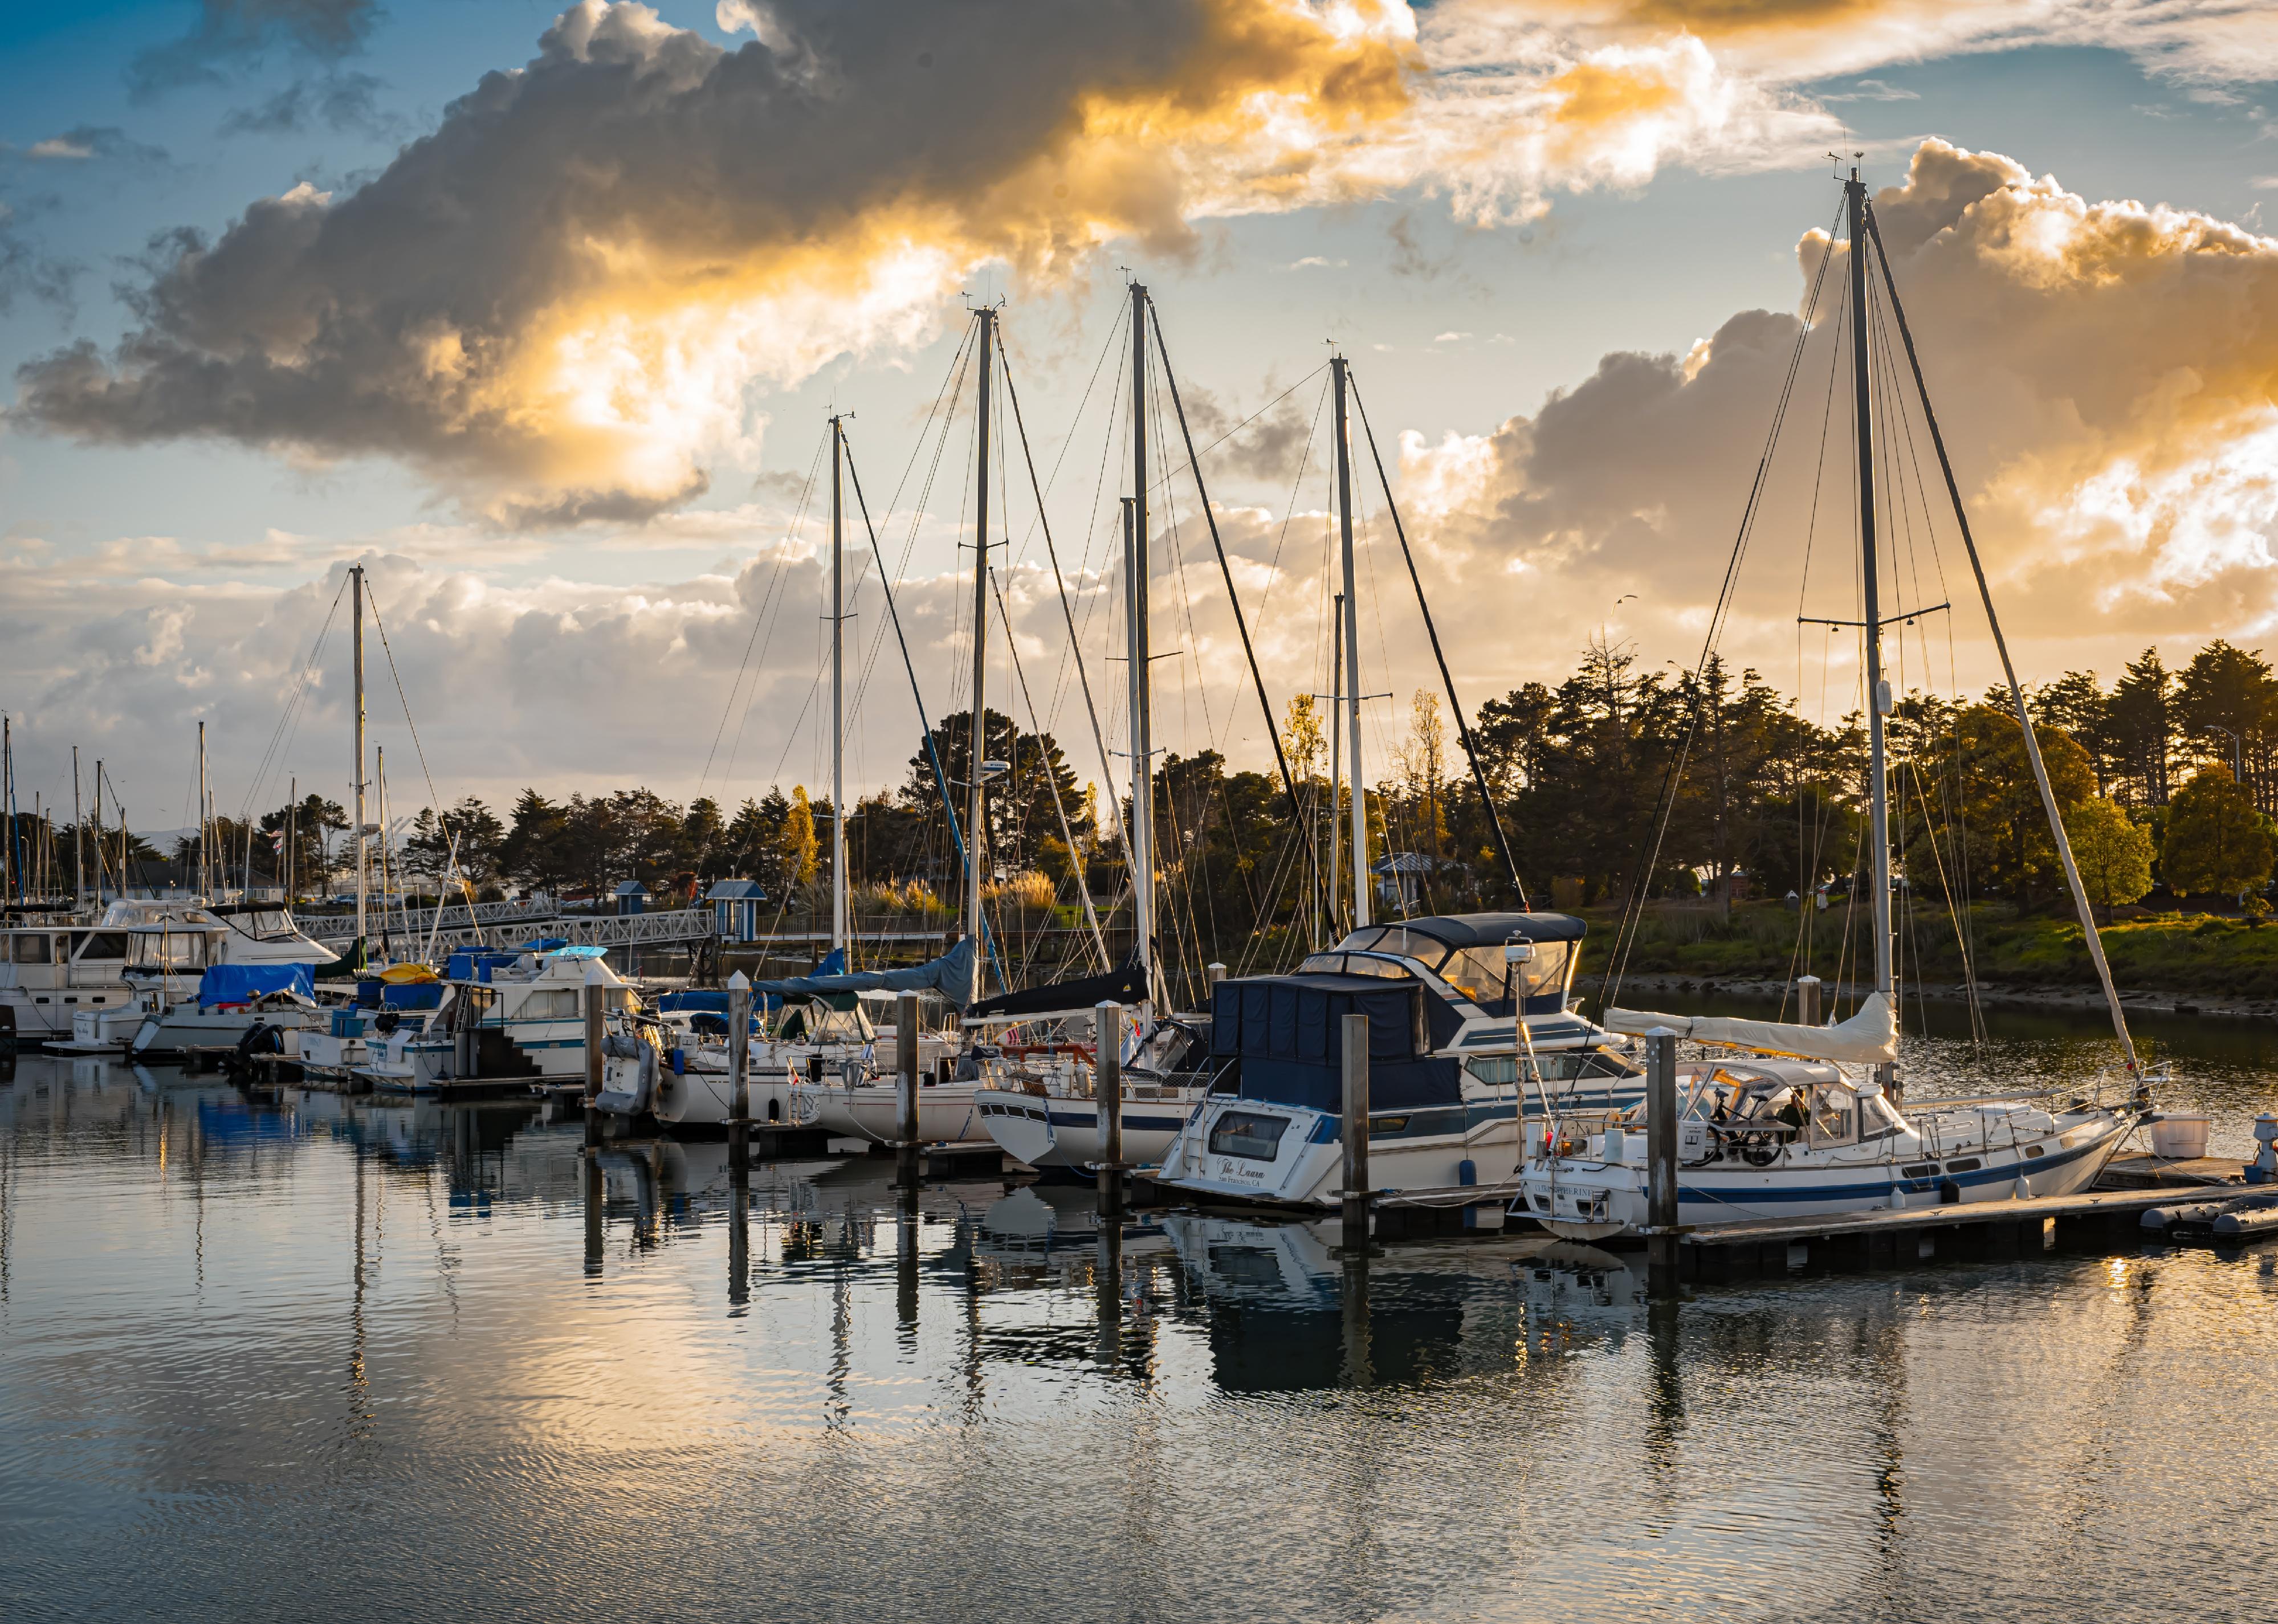 Emeryville Marina before sunset, with dramatic clouds.